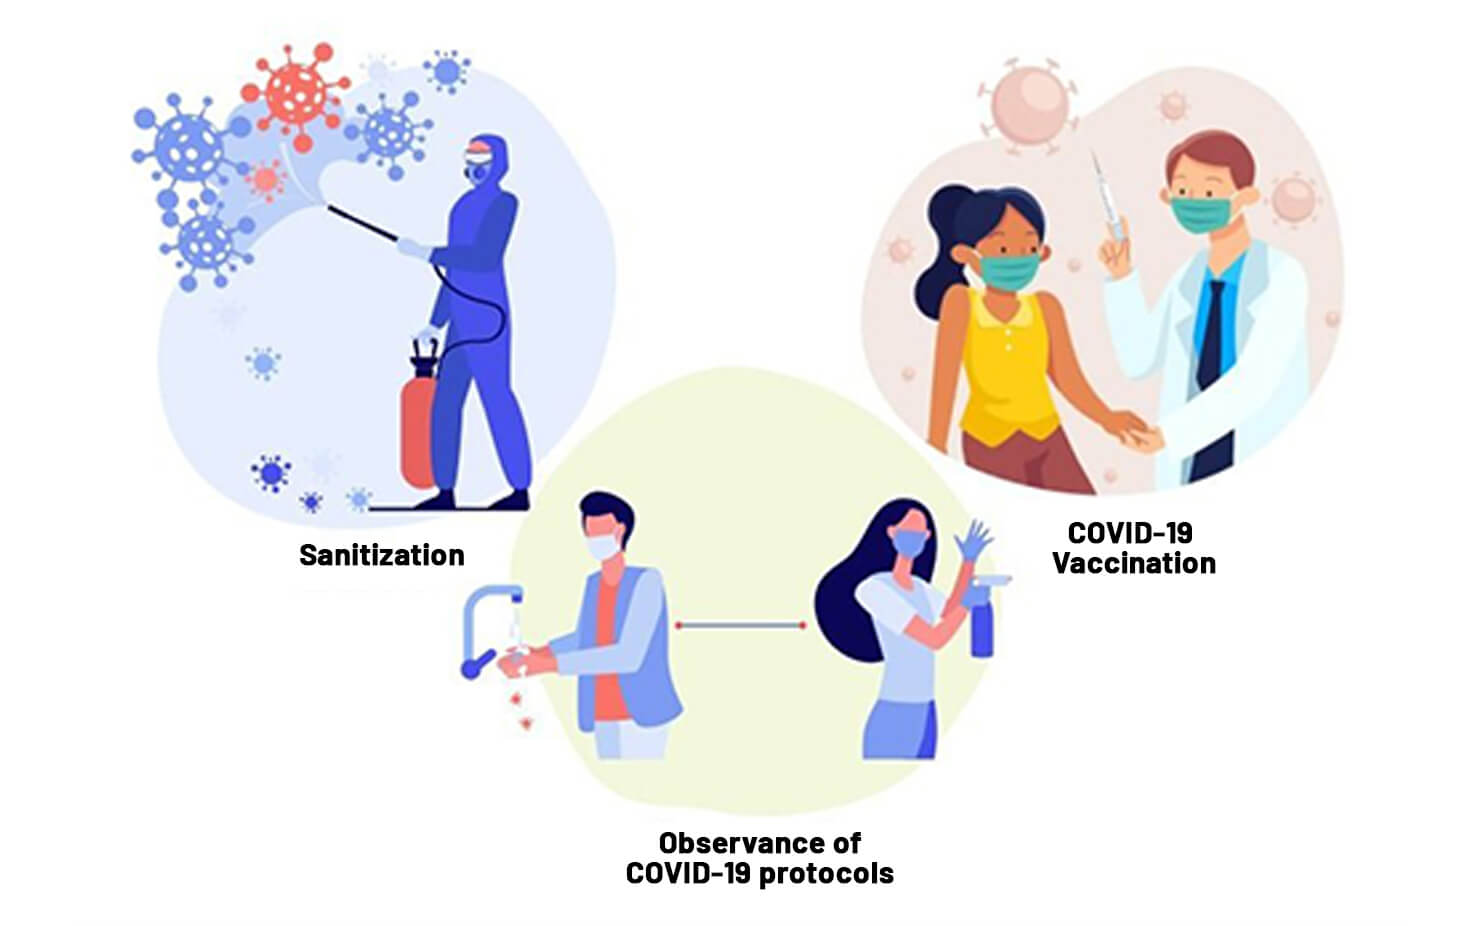 Responding to the pandemic with responsibility and responsiveness